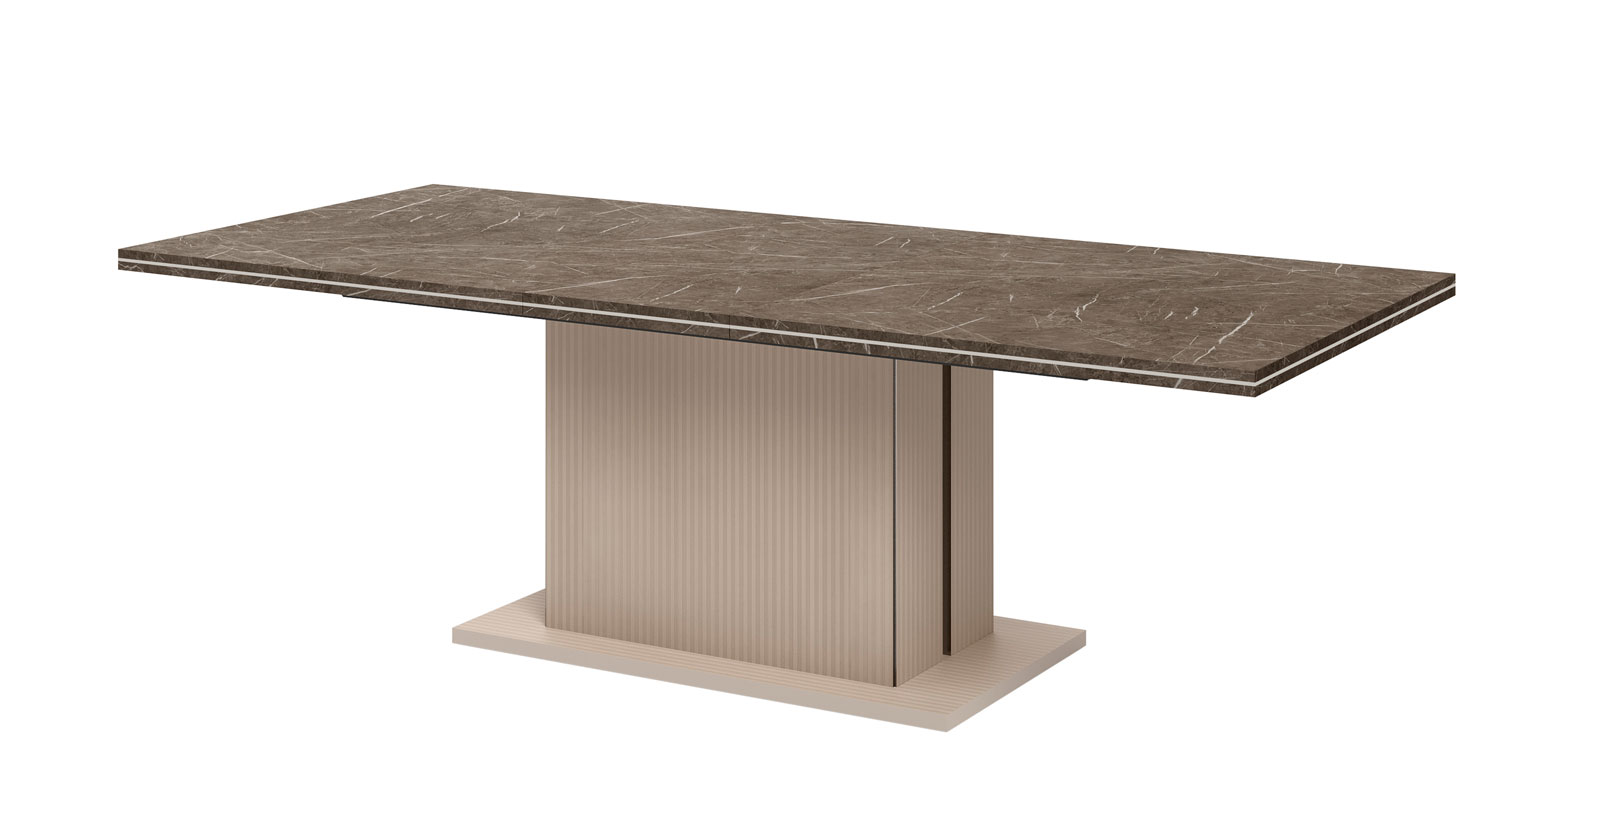 Clearance Bedroom Fidia- Aris Dining table